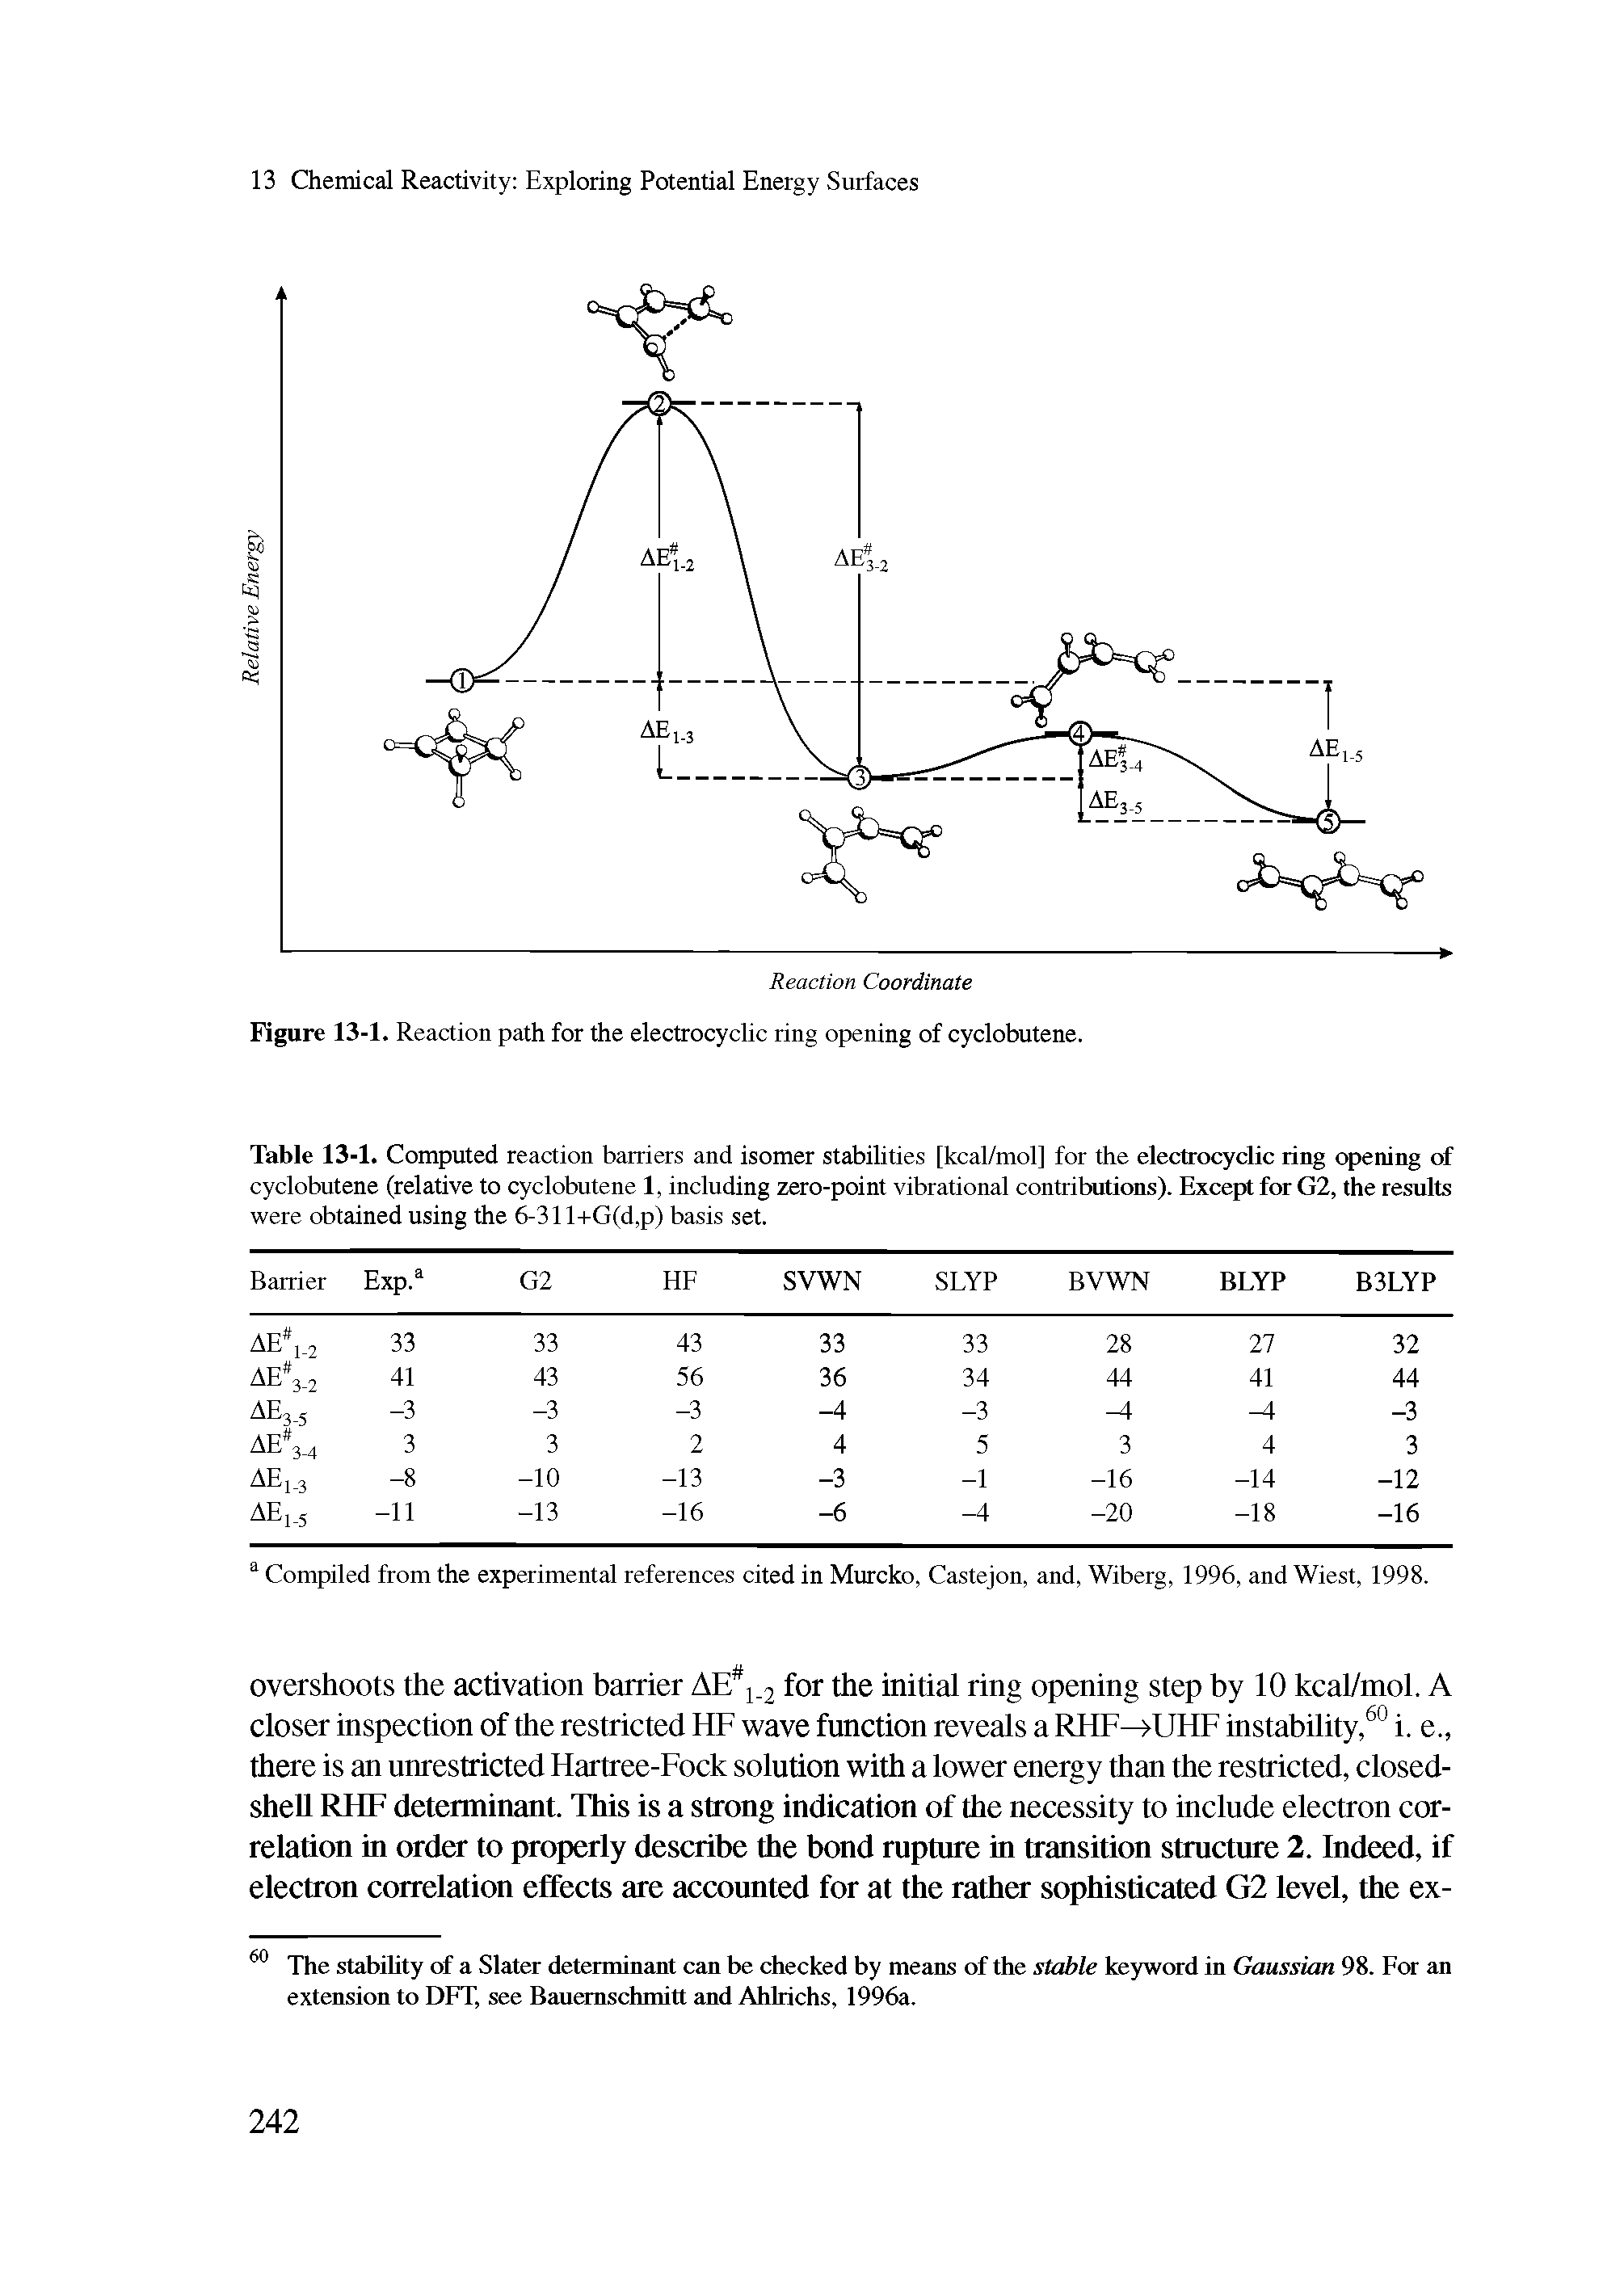 Table 13-1. Computed reaction barriers and isomer stabilities [kcal/mol] for the electrocyclic ring opening of cyclobutene (relative to cyclobutene 1, including zero-point vibrational contributions). Except for G2, the results were obtained using the 6-311+G(d,p) basis set.